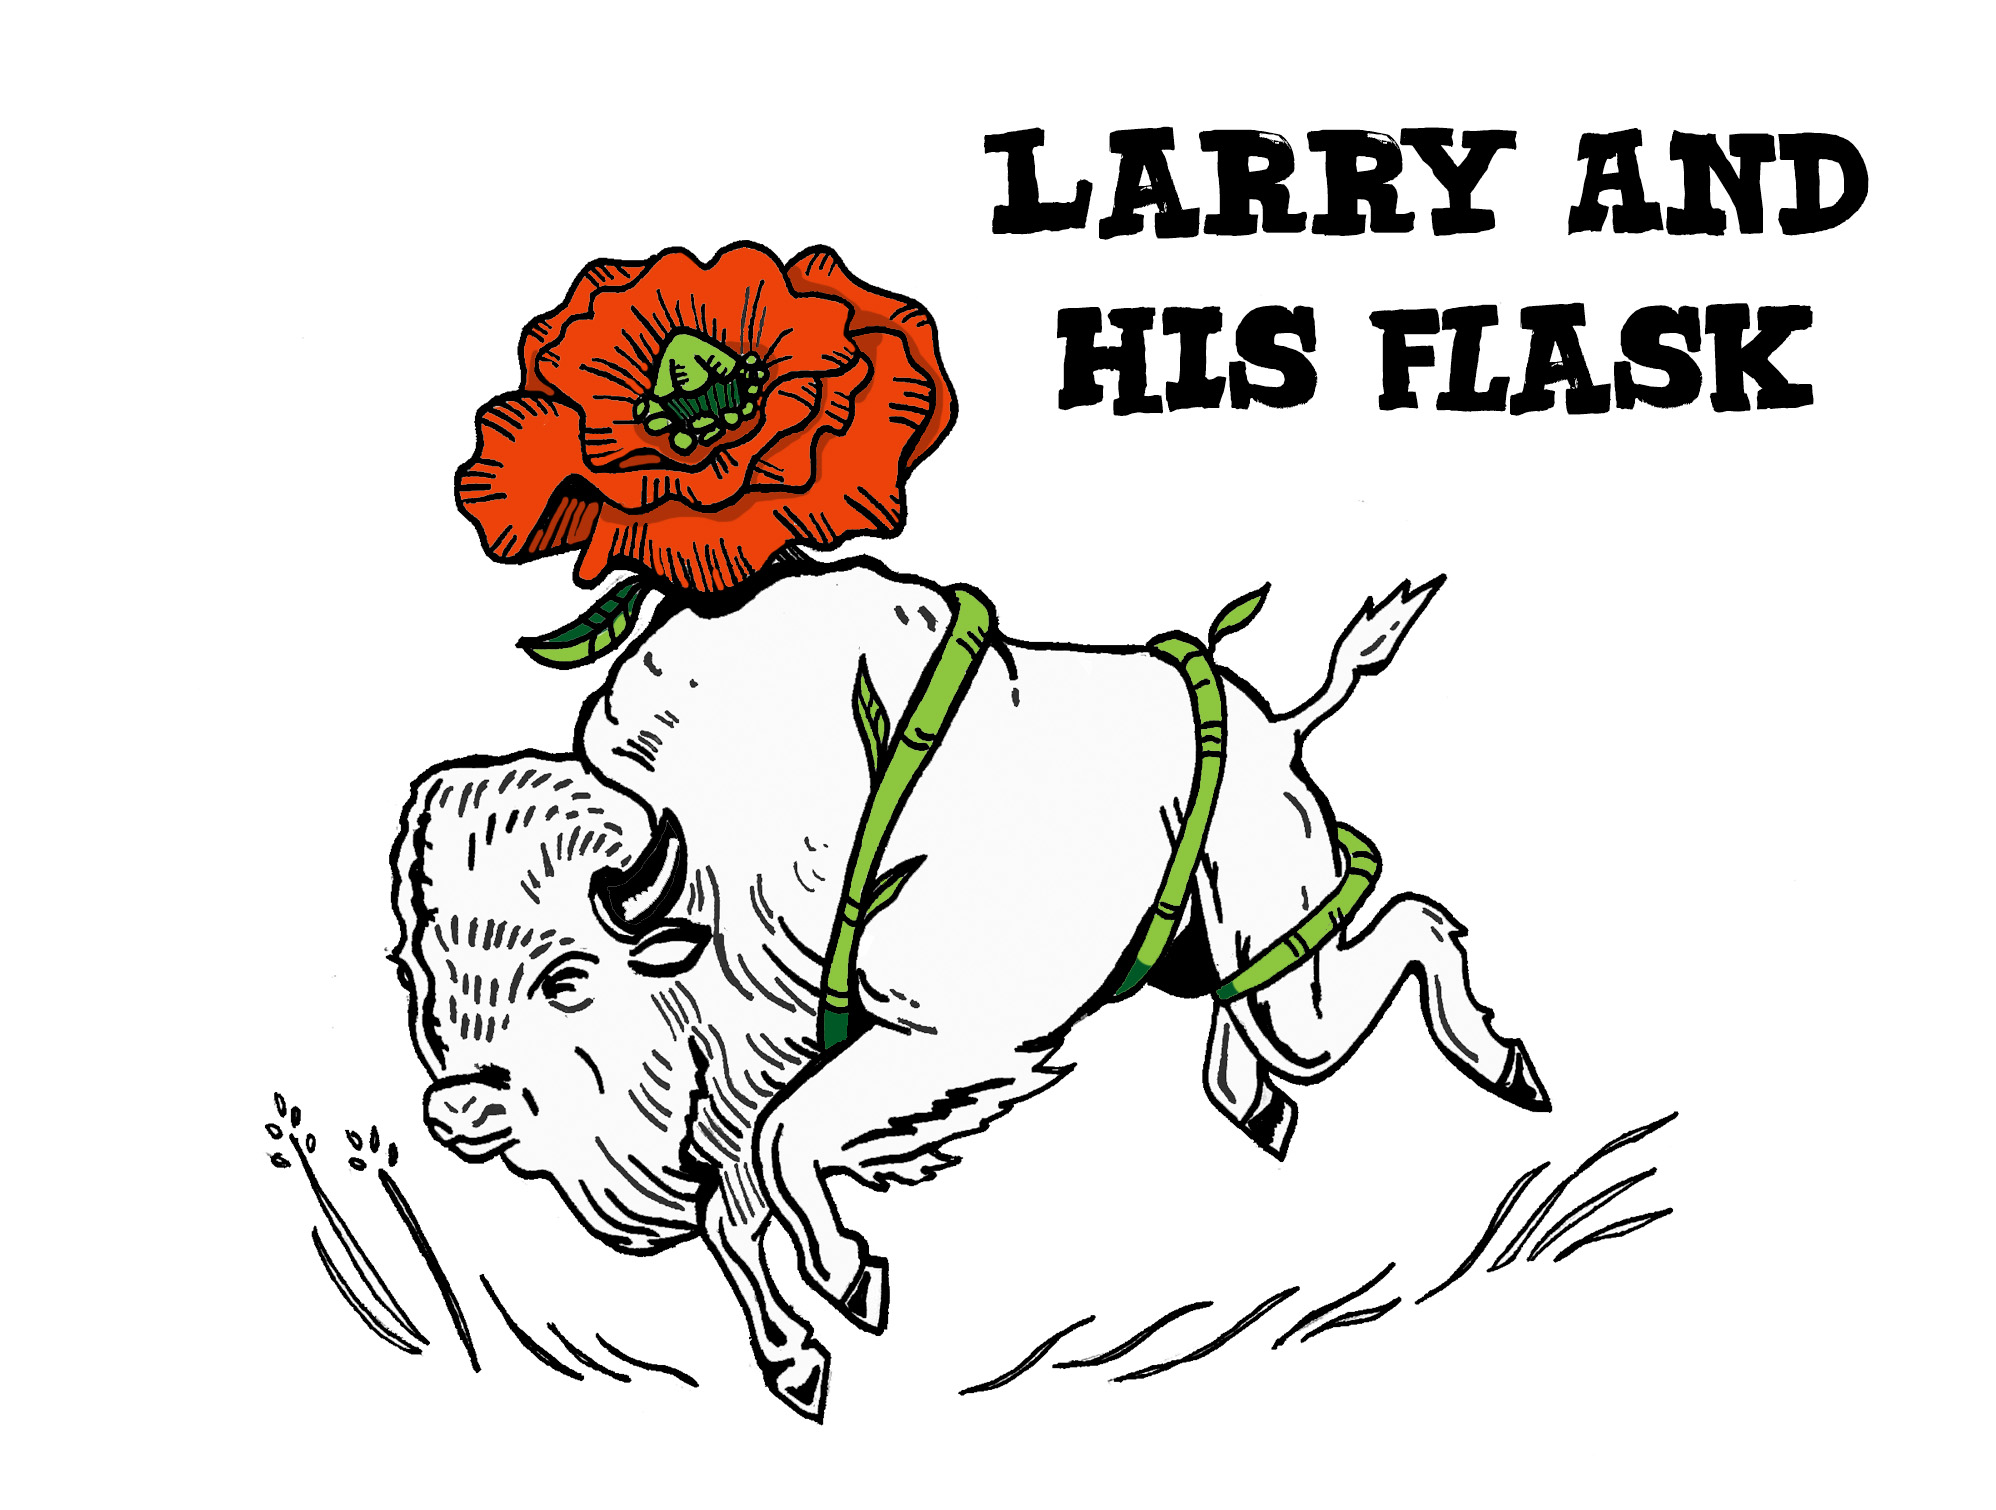  Graphic Designs for the band Larry And His Flash 2018.&nbsp; 